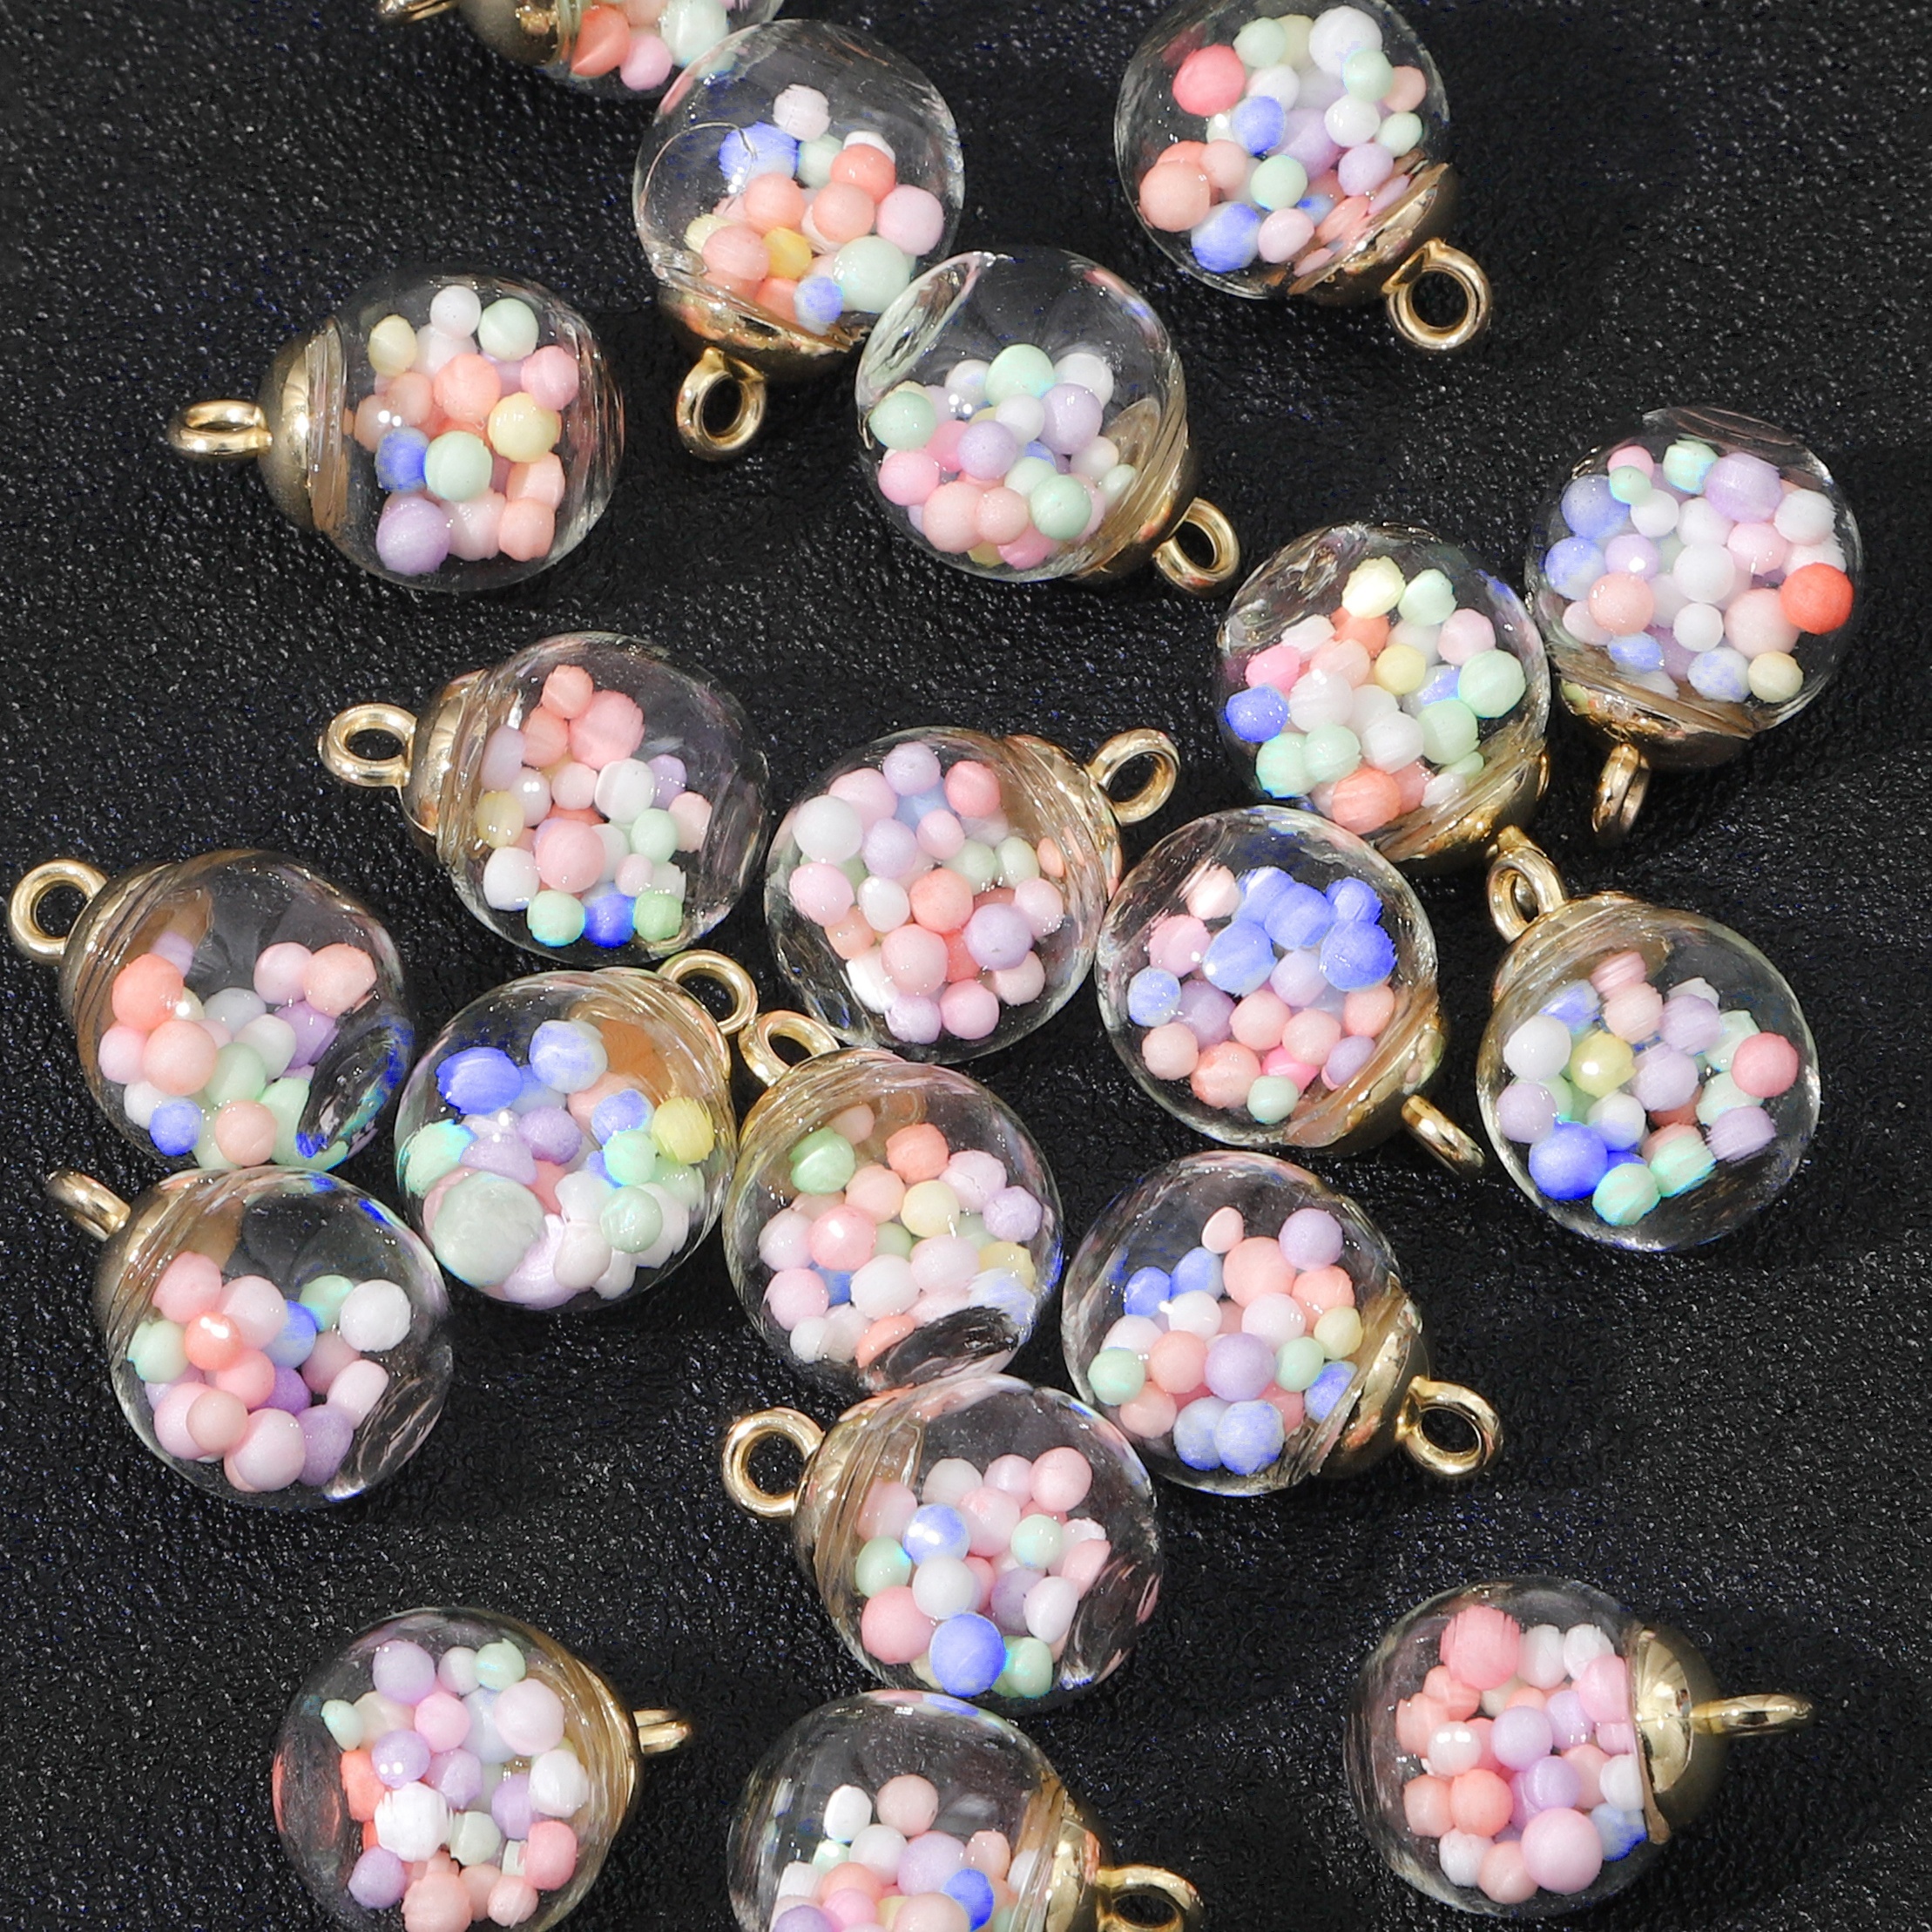 

20pcs Transparent Glass Ball Pendant, Colorful Bead Filled Pendant, Diy Handmade Jewelry Earring Necklace Pendant Key Chain Pendant Accessories, 1.5*2.1cm/0.59*0.83inch